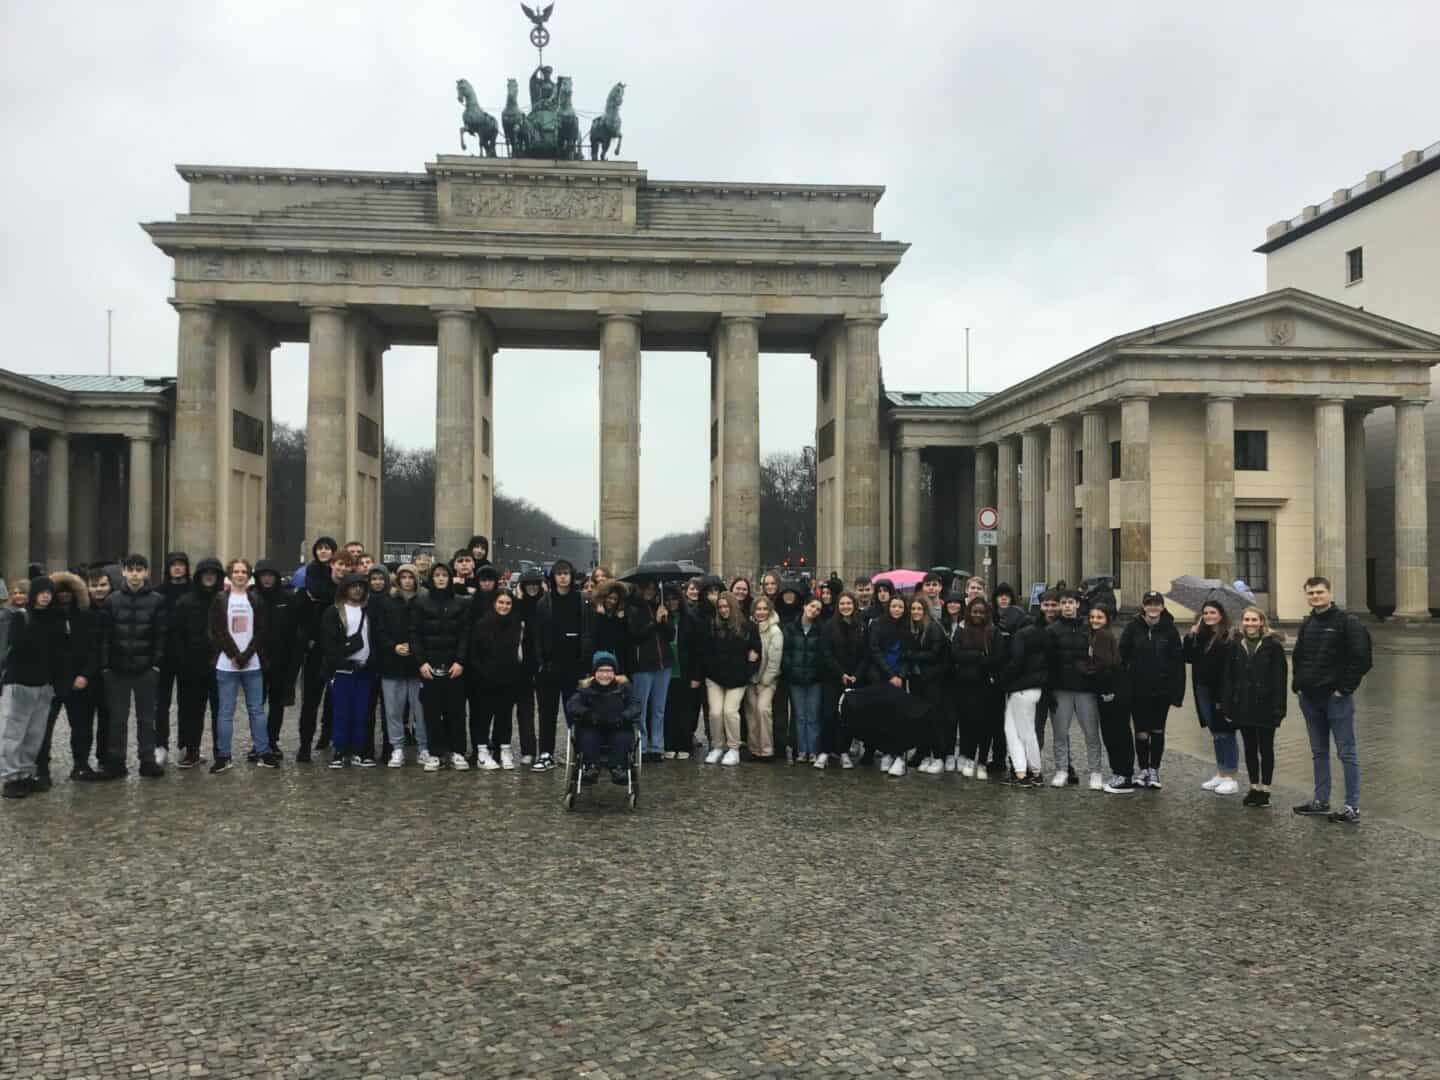 Students stand in front of the Brandenburg Gate